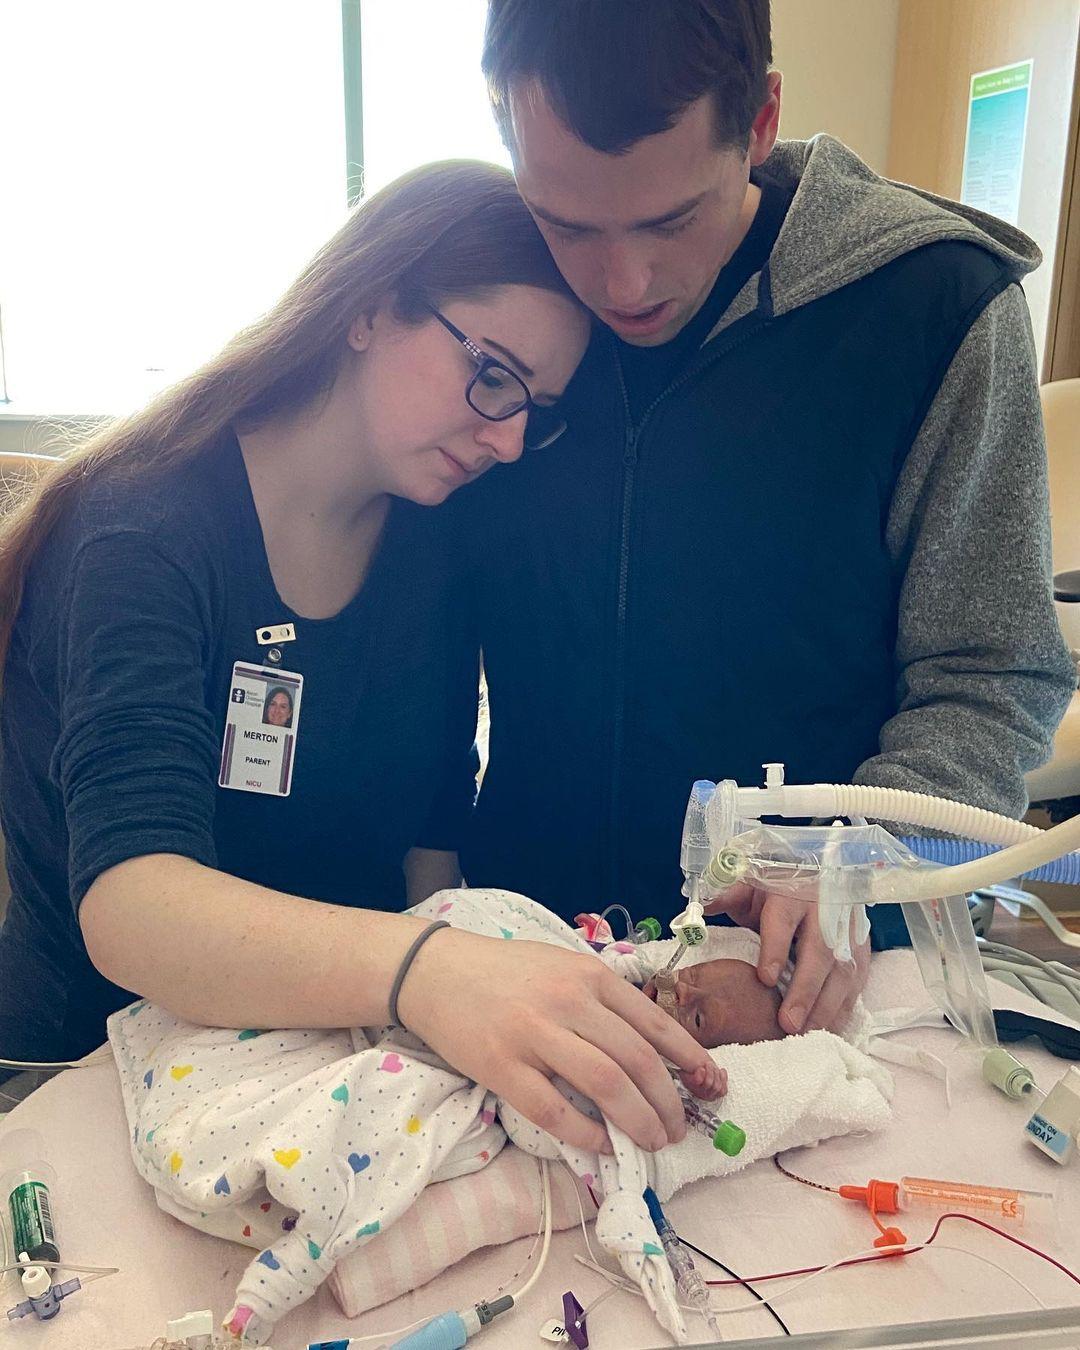 Hannah and her husband, Jake, with their late baby daughter Meredith, who passed away three days after birth. (Courtesy of <a href="https://www.instagram.com/quintupletmama/">Hannah Merton</a>)